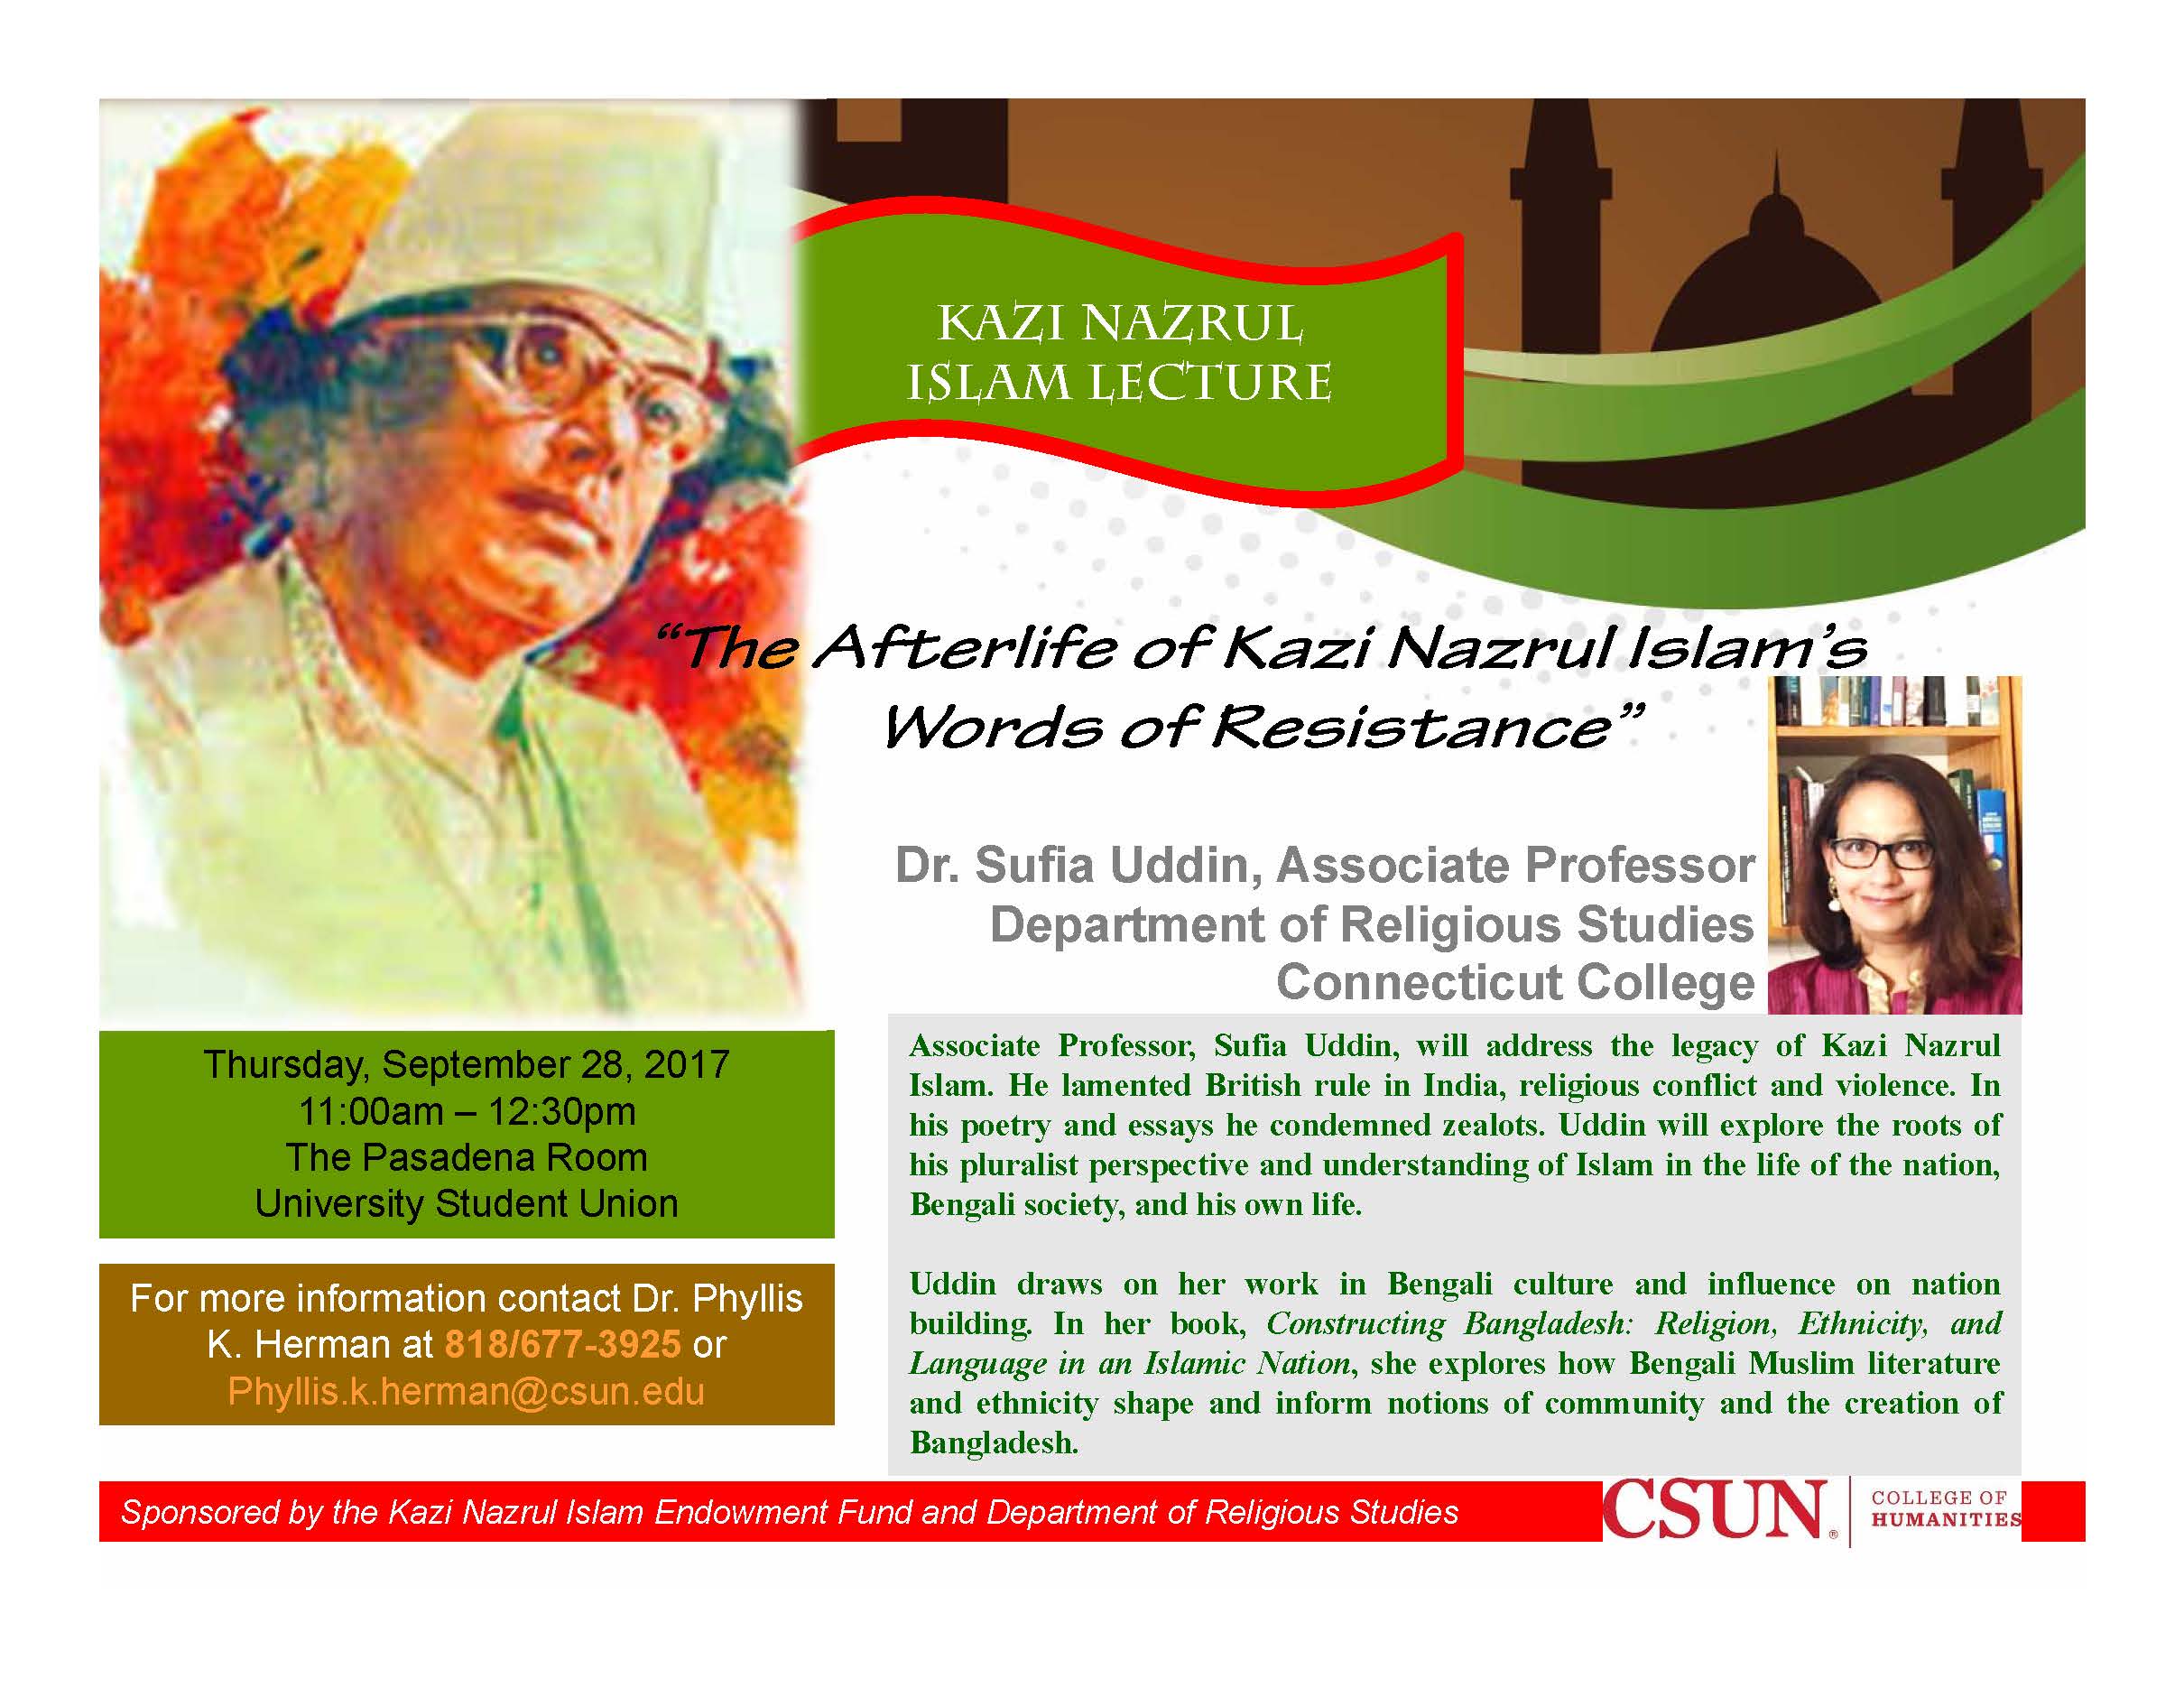 The Afterlife of Kazi Nazrul Islam's Words of Resistance